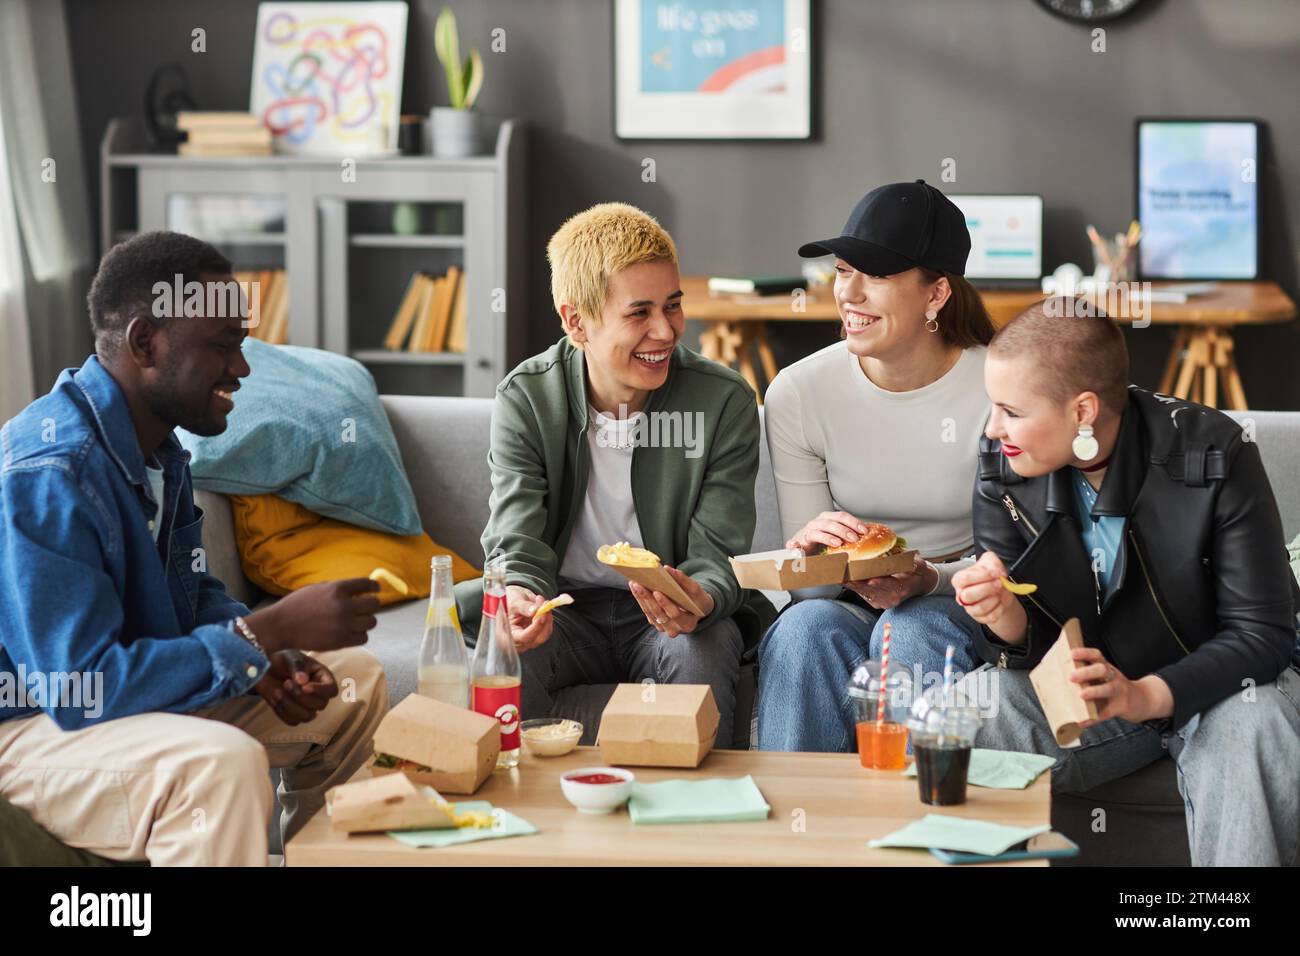 Smiling Young Adults Eating Fast Food Stock Photo